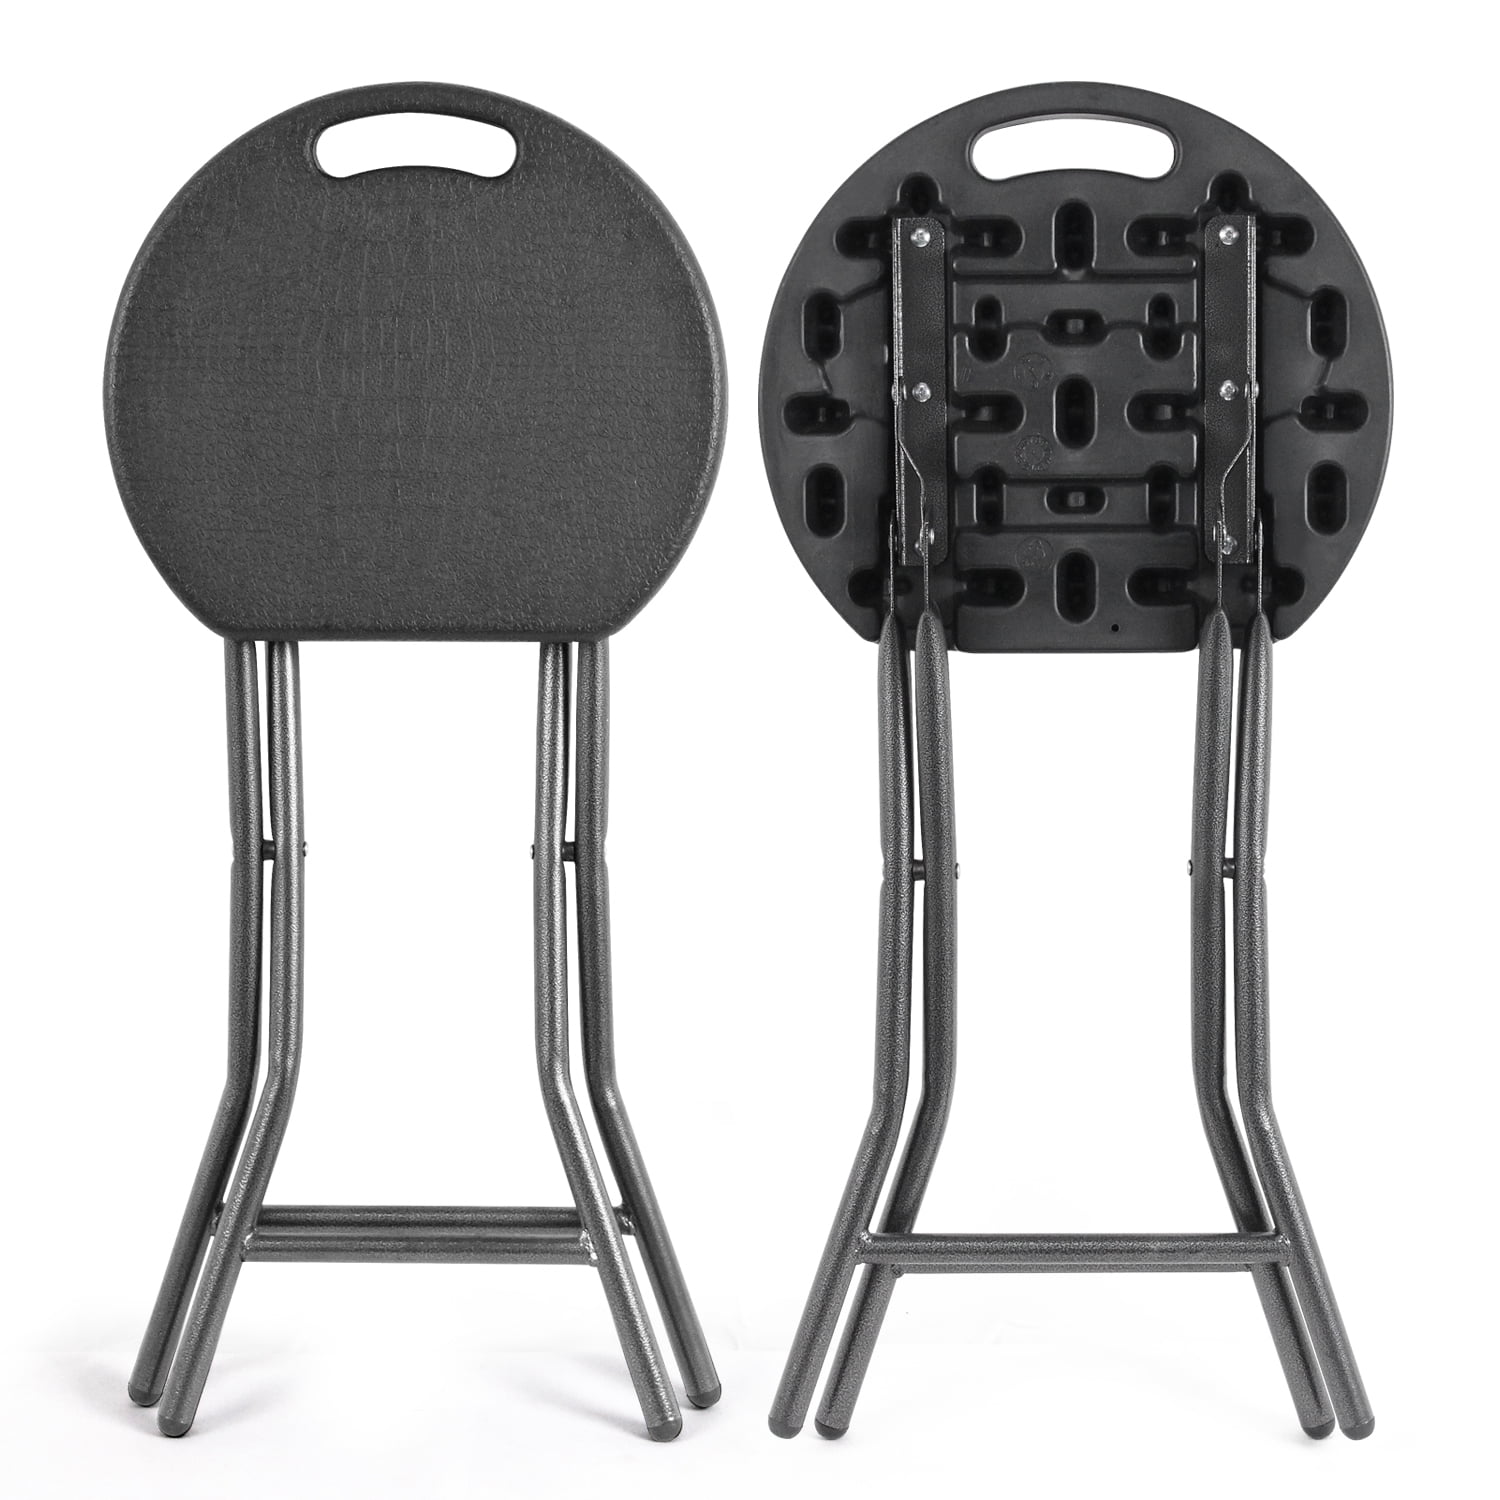 Small and Light Weight FDC-BLK1-4PC 4 Packs Black Round Folding Chair Stool Indoor/Outdoor Stackable Portable 